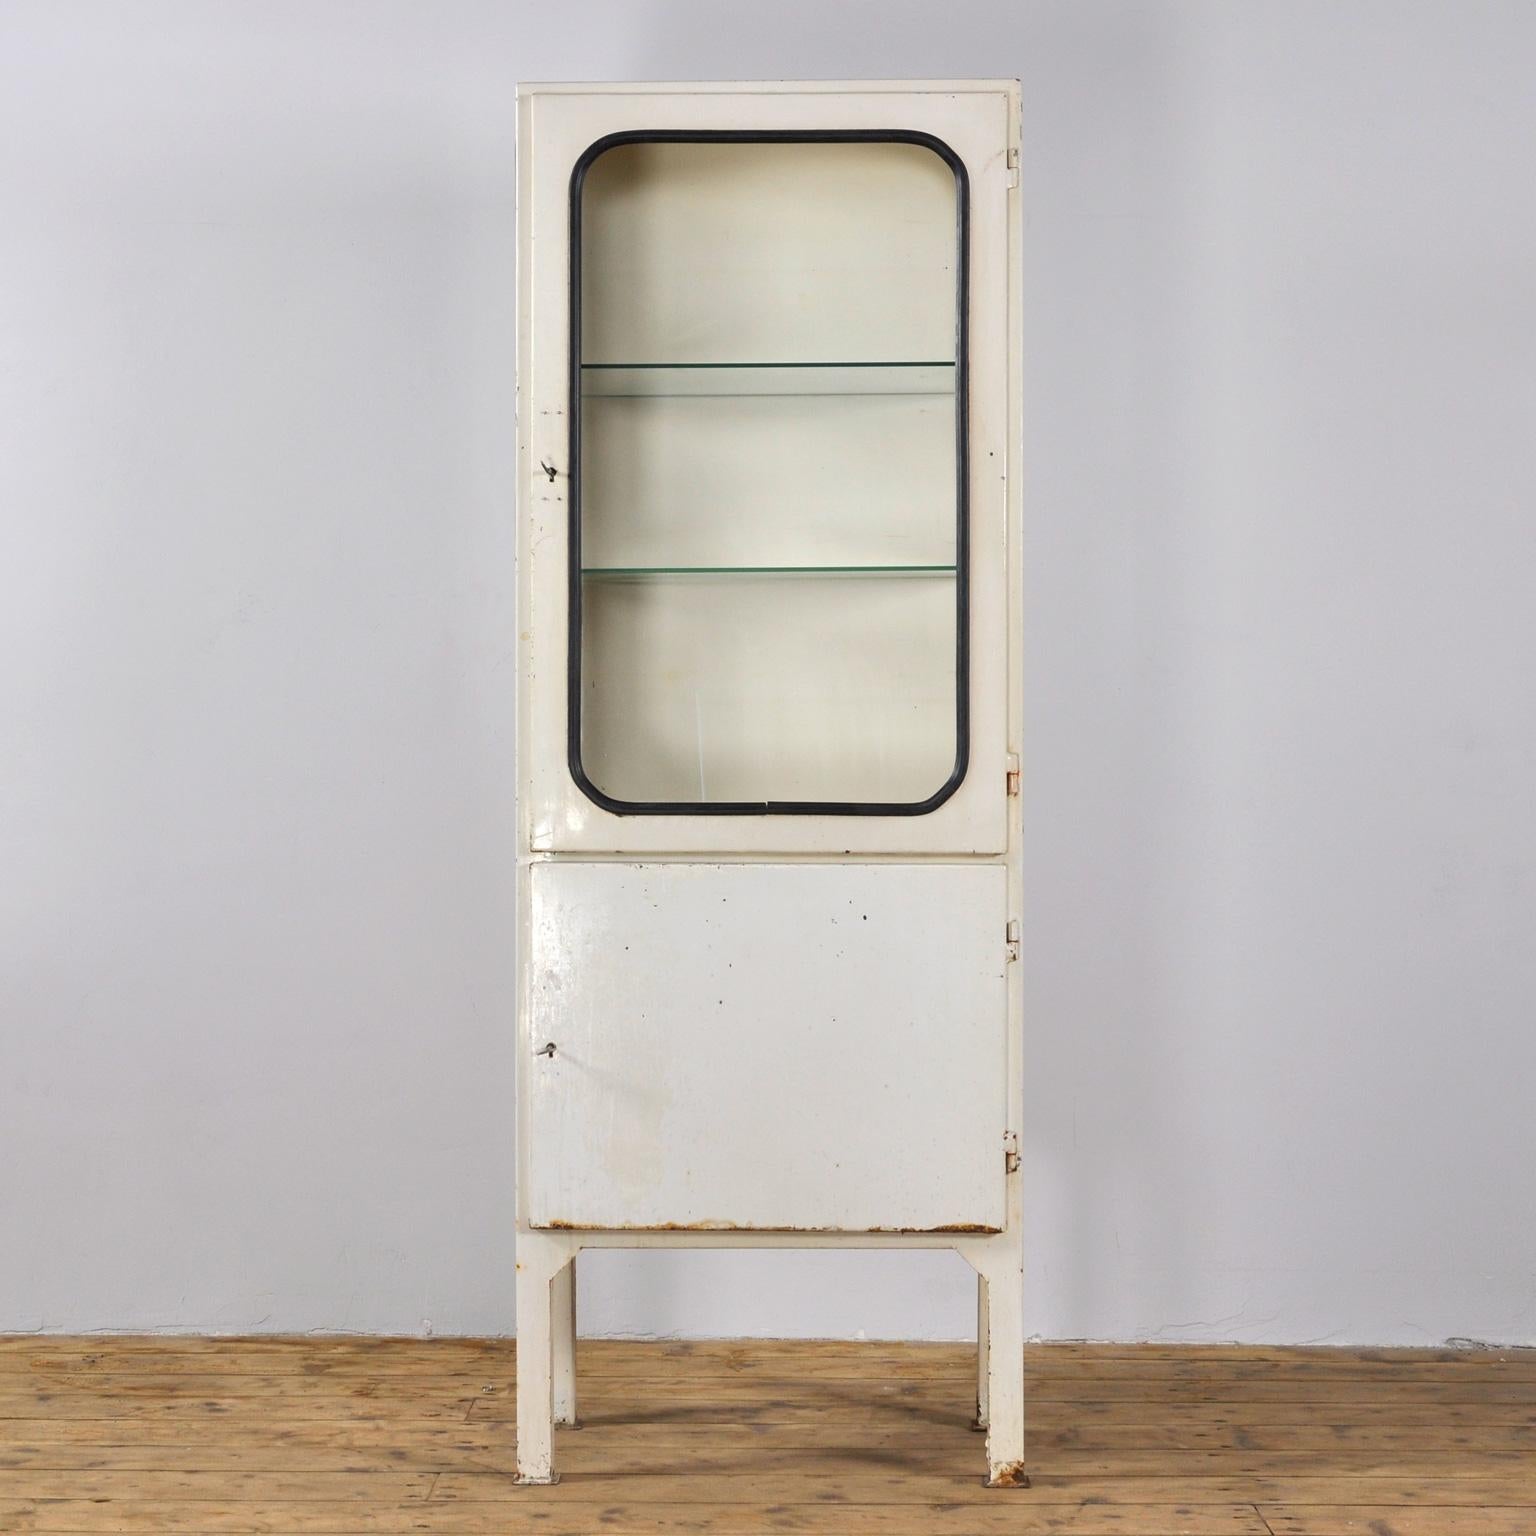 This medical cabinet was designed in the 1970s and was produced circa 1975 in Hungary. It is made from iron and antique glass with new glass shelves. The glass is held by a black rubber strip. The cabinet features two adjustable glass shelves and